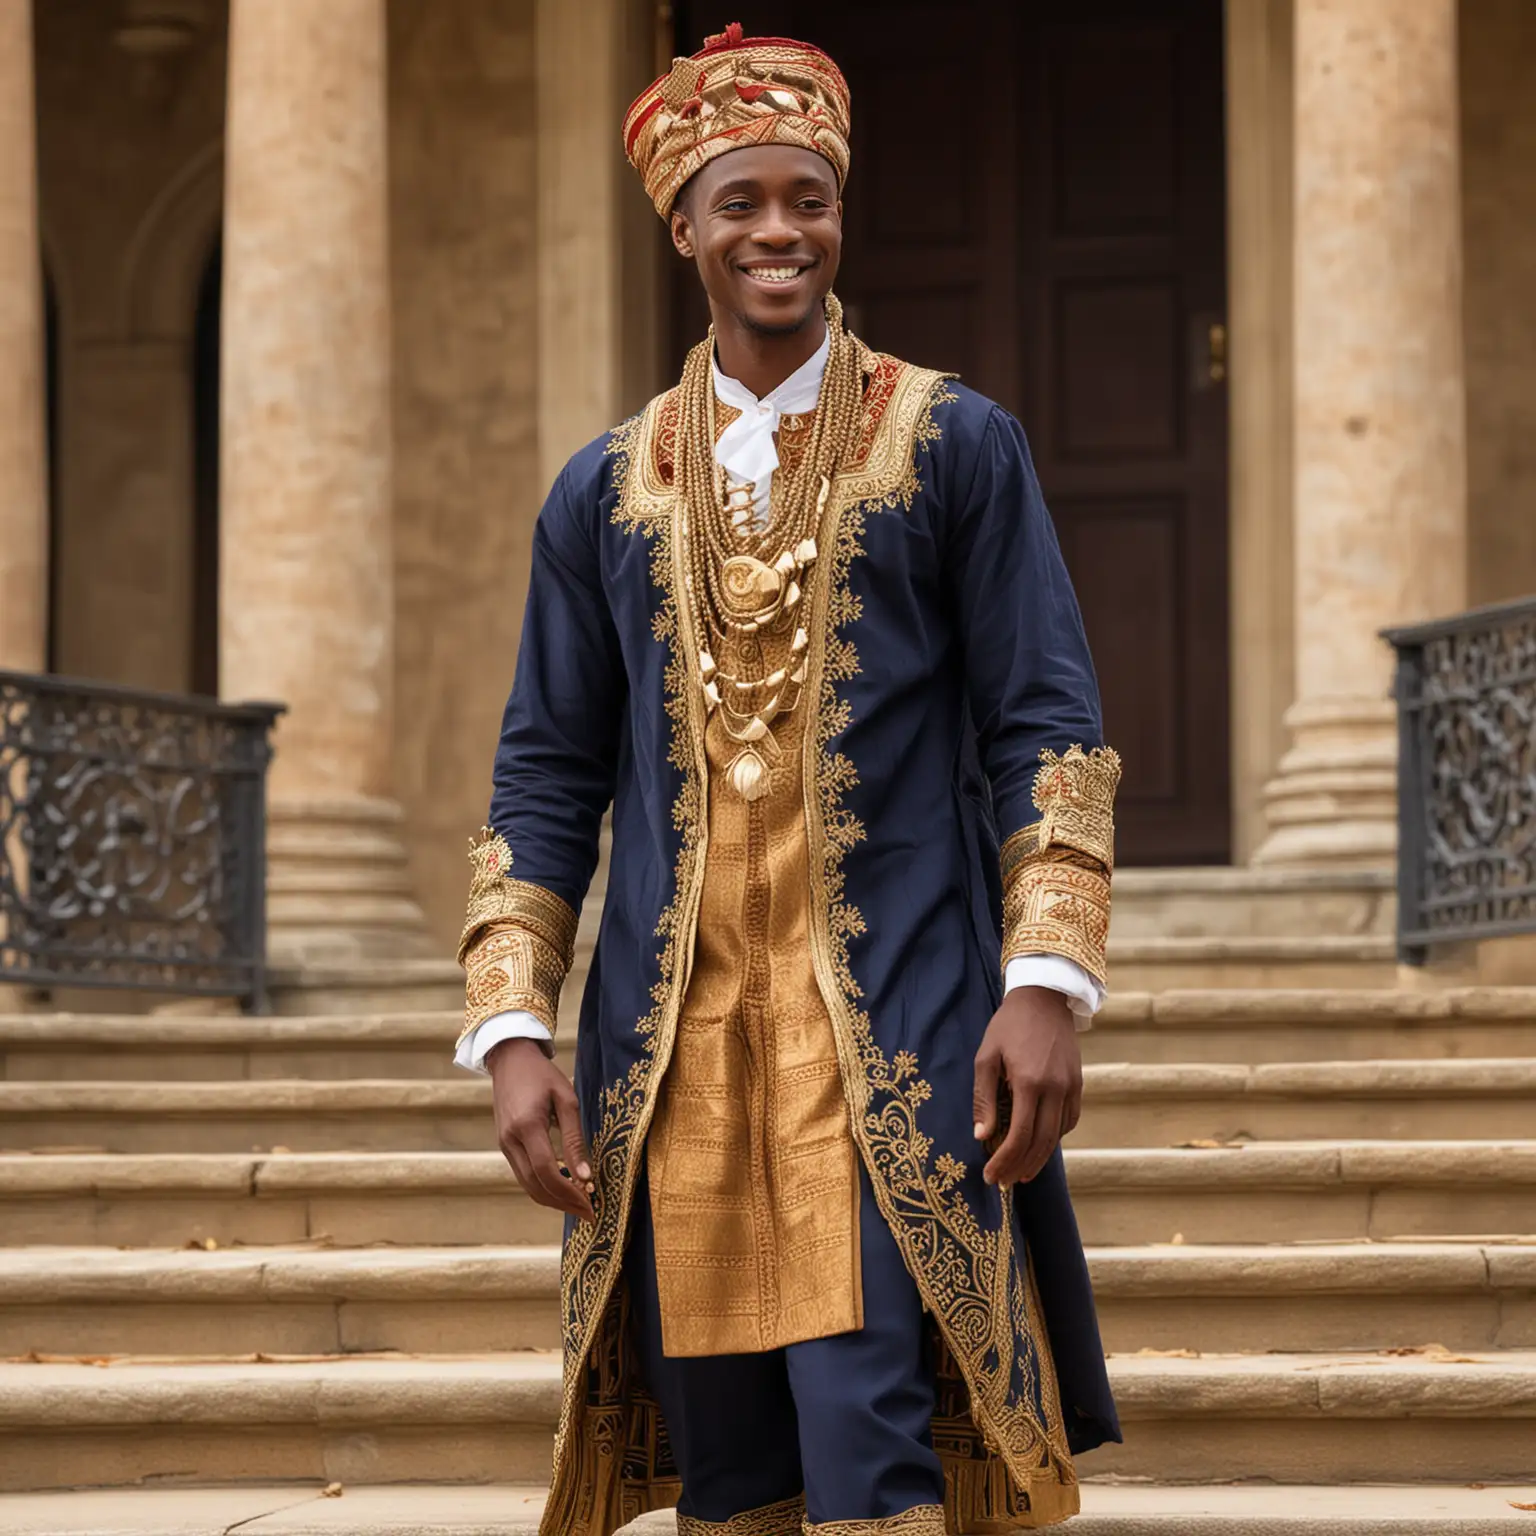 Tall, Handsome, wise looking thirty-something African Prince dressed in cultural outfit, looking front, smiling, with brown real skin color, natural brown hair, standing on the steps of a palace